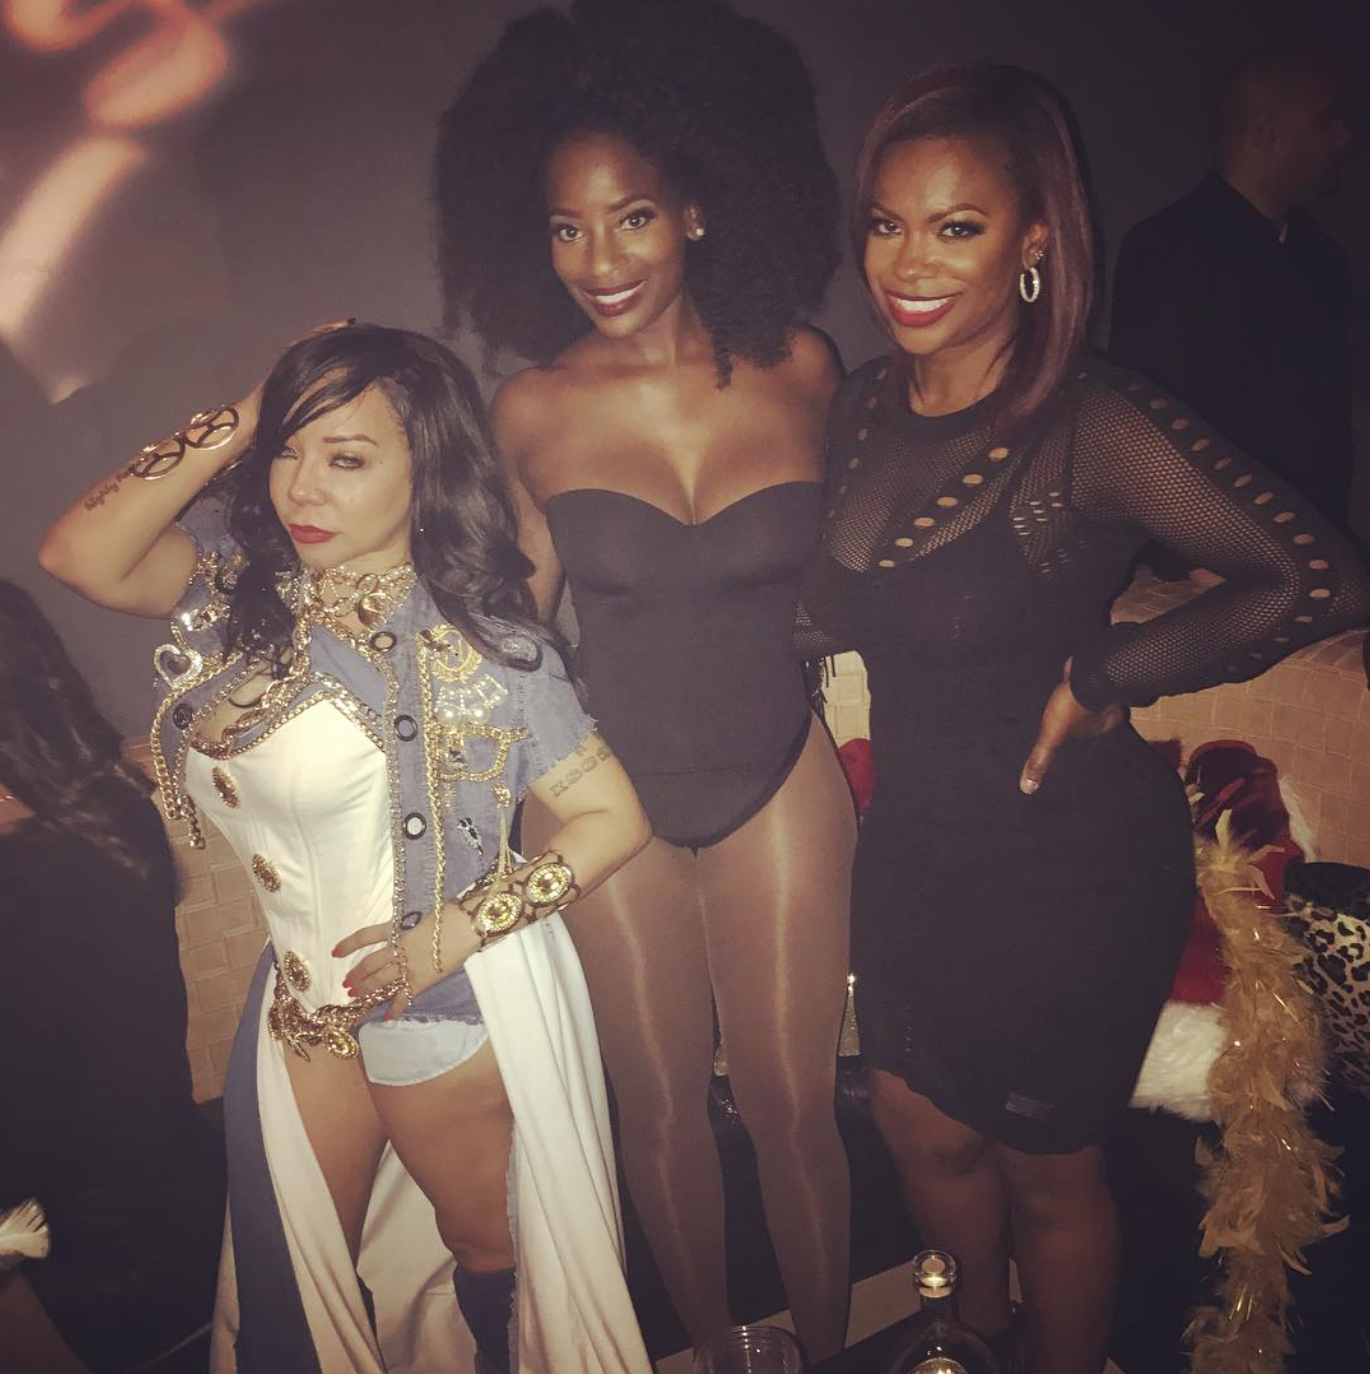 Toya Wright Threw An Epic Player's Ball Birthday Party, Here's What Went Down
